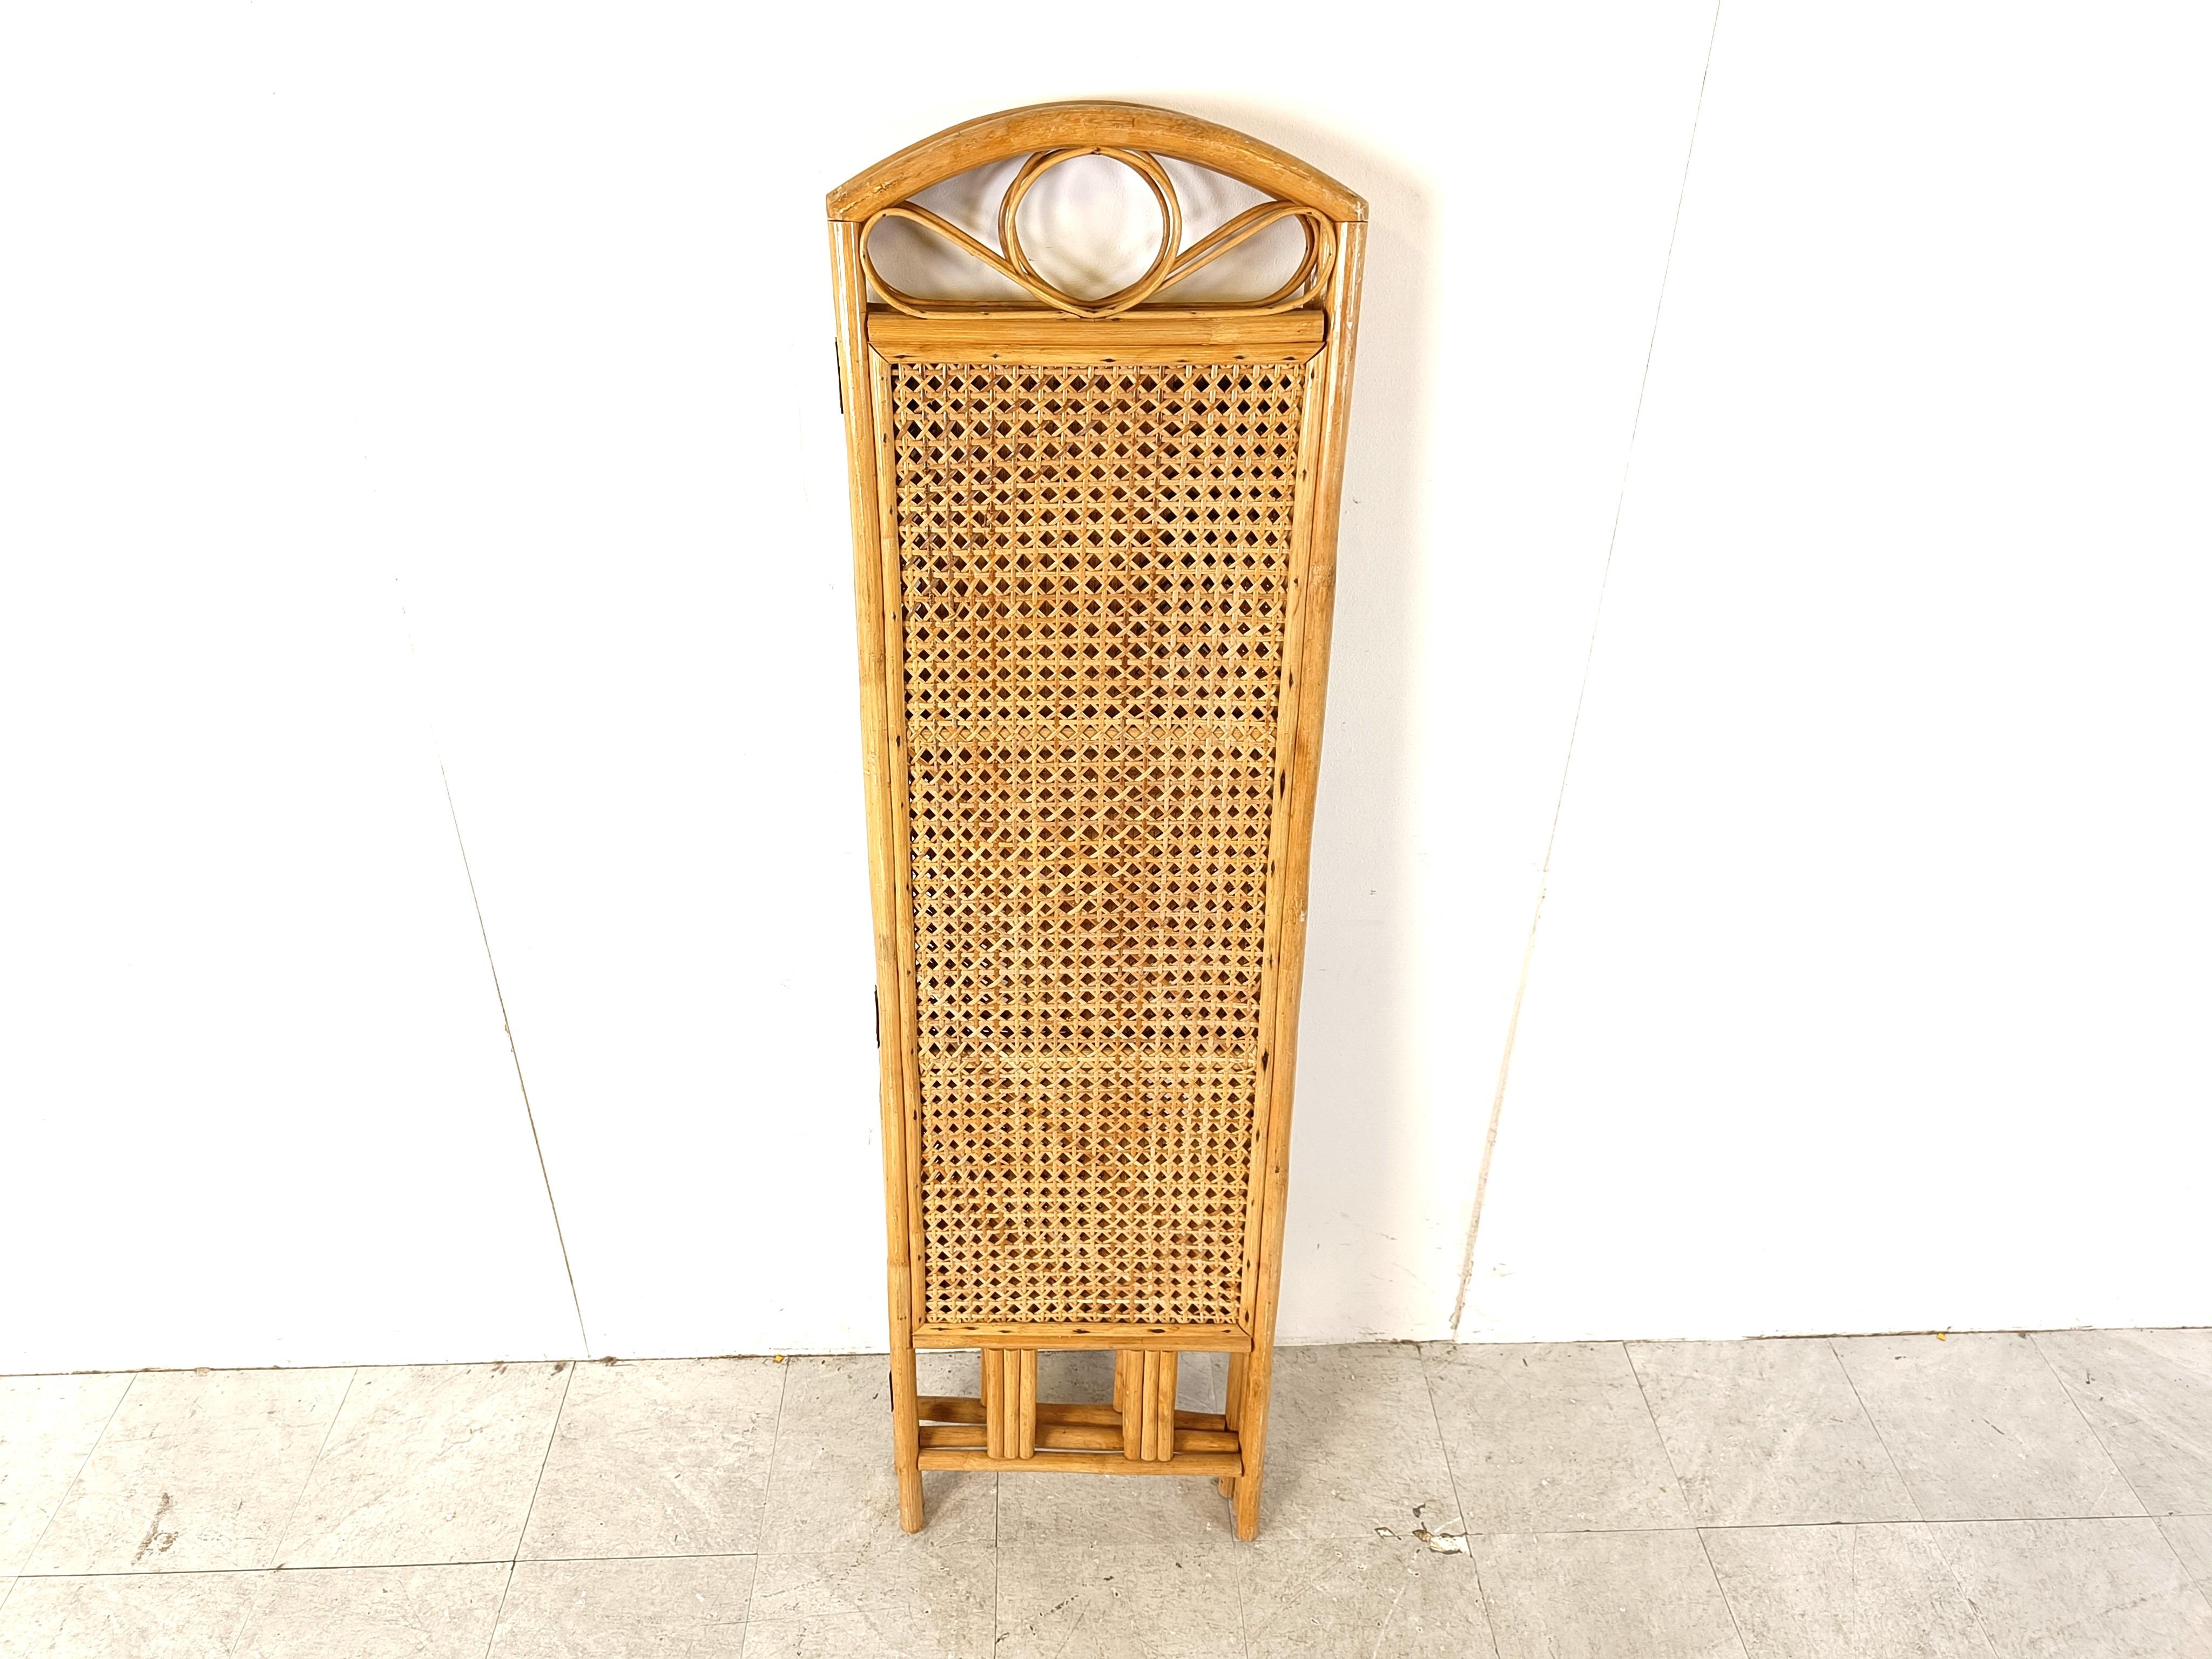 Bentwood paravent or room divider with woven cane panels.

3 screen folding paravent.

Good condition

1970s 

Height: 180cm